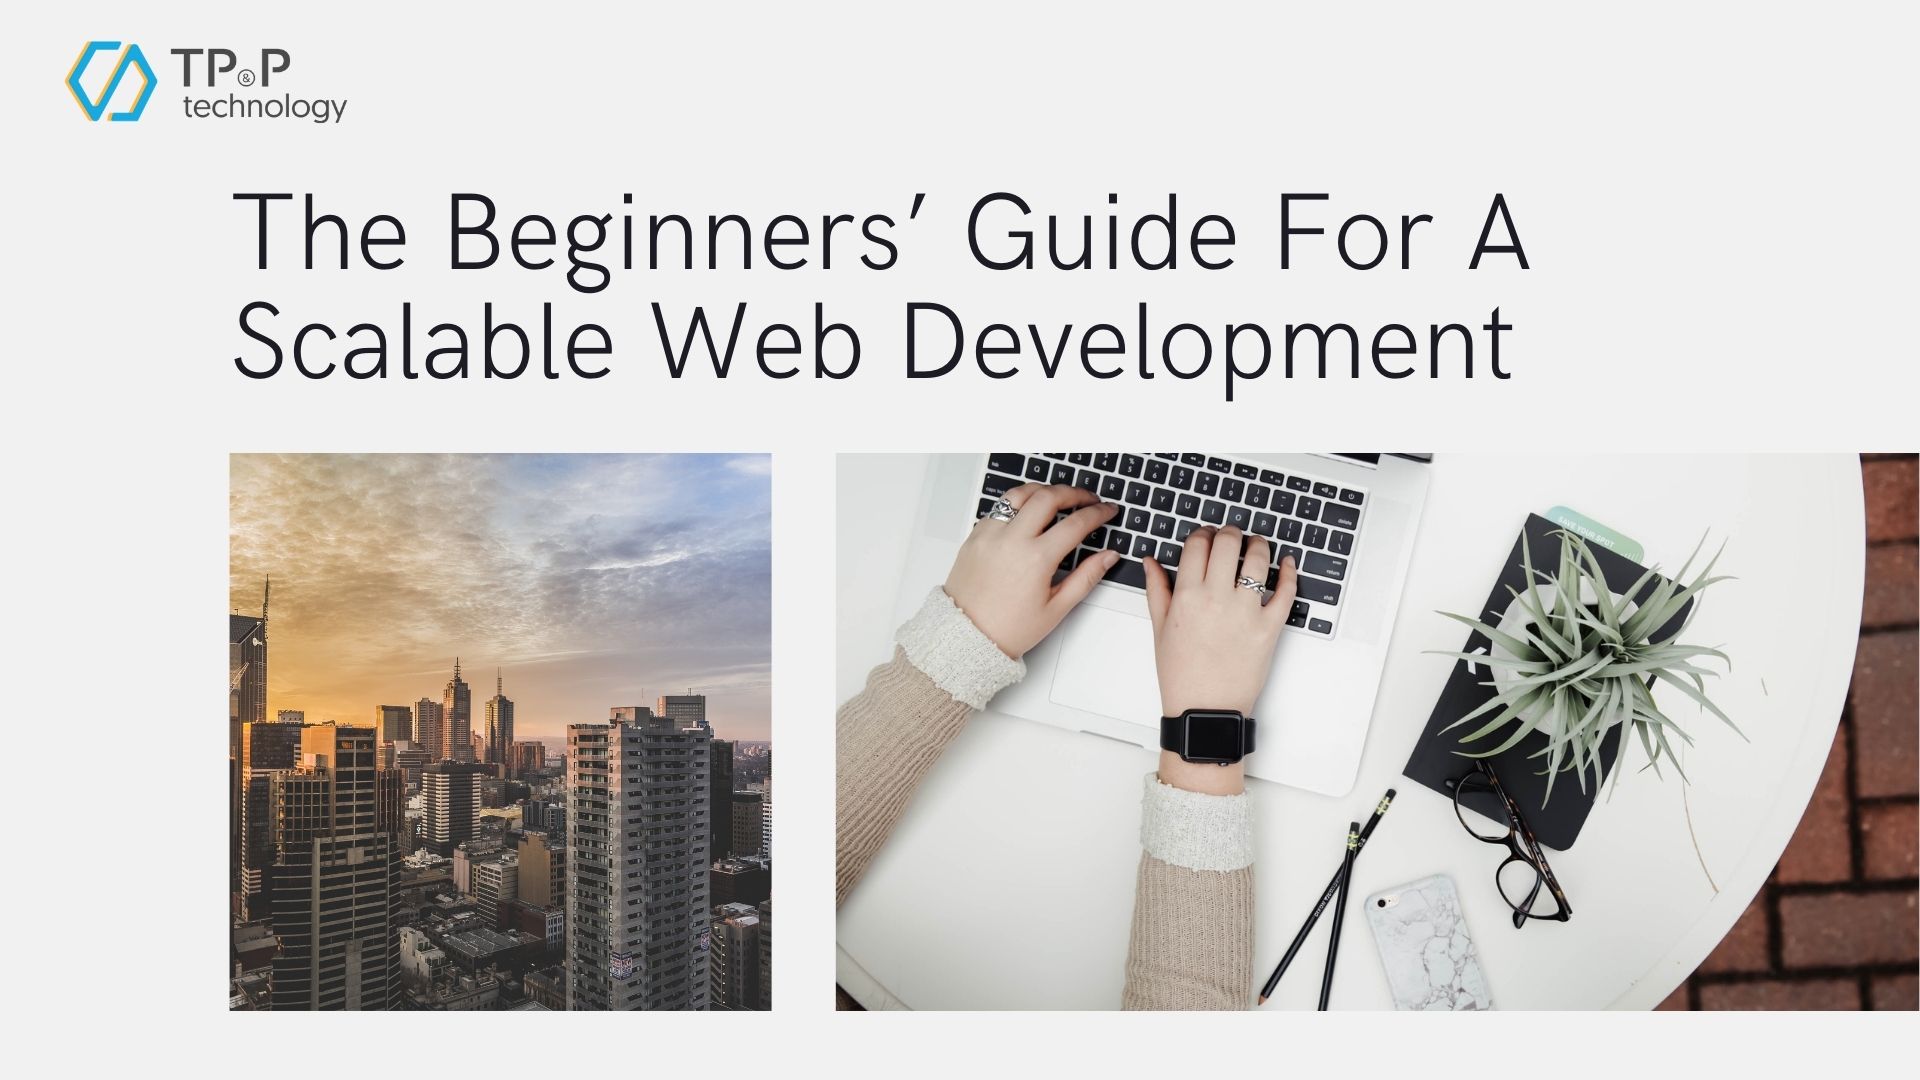 The Beginners’ Guide For A Scalable Web Development